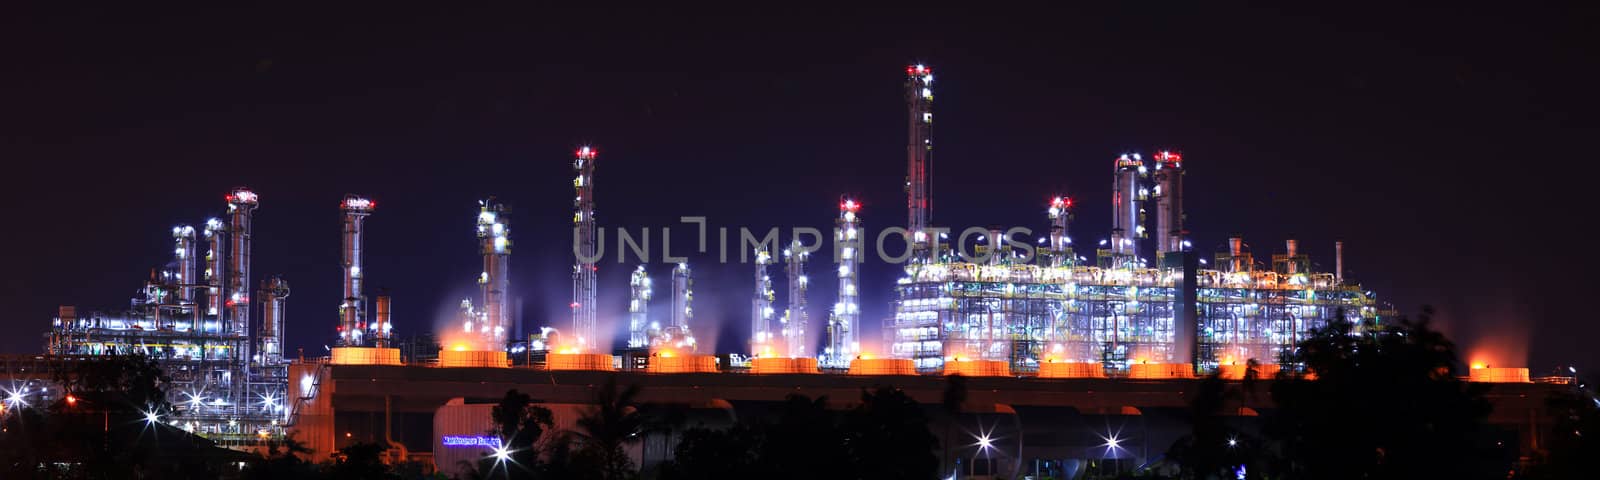 Panoramic view petrochemical oil refinery plant shines at night